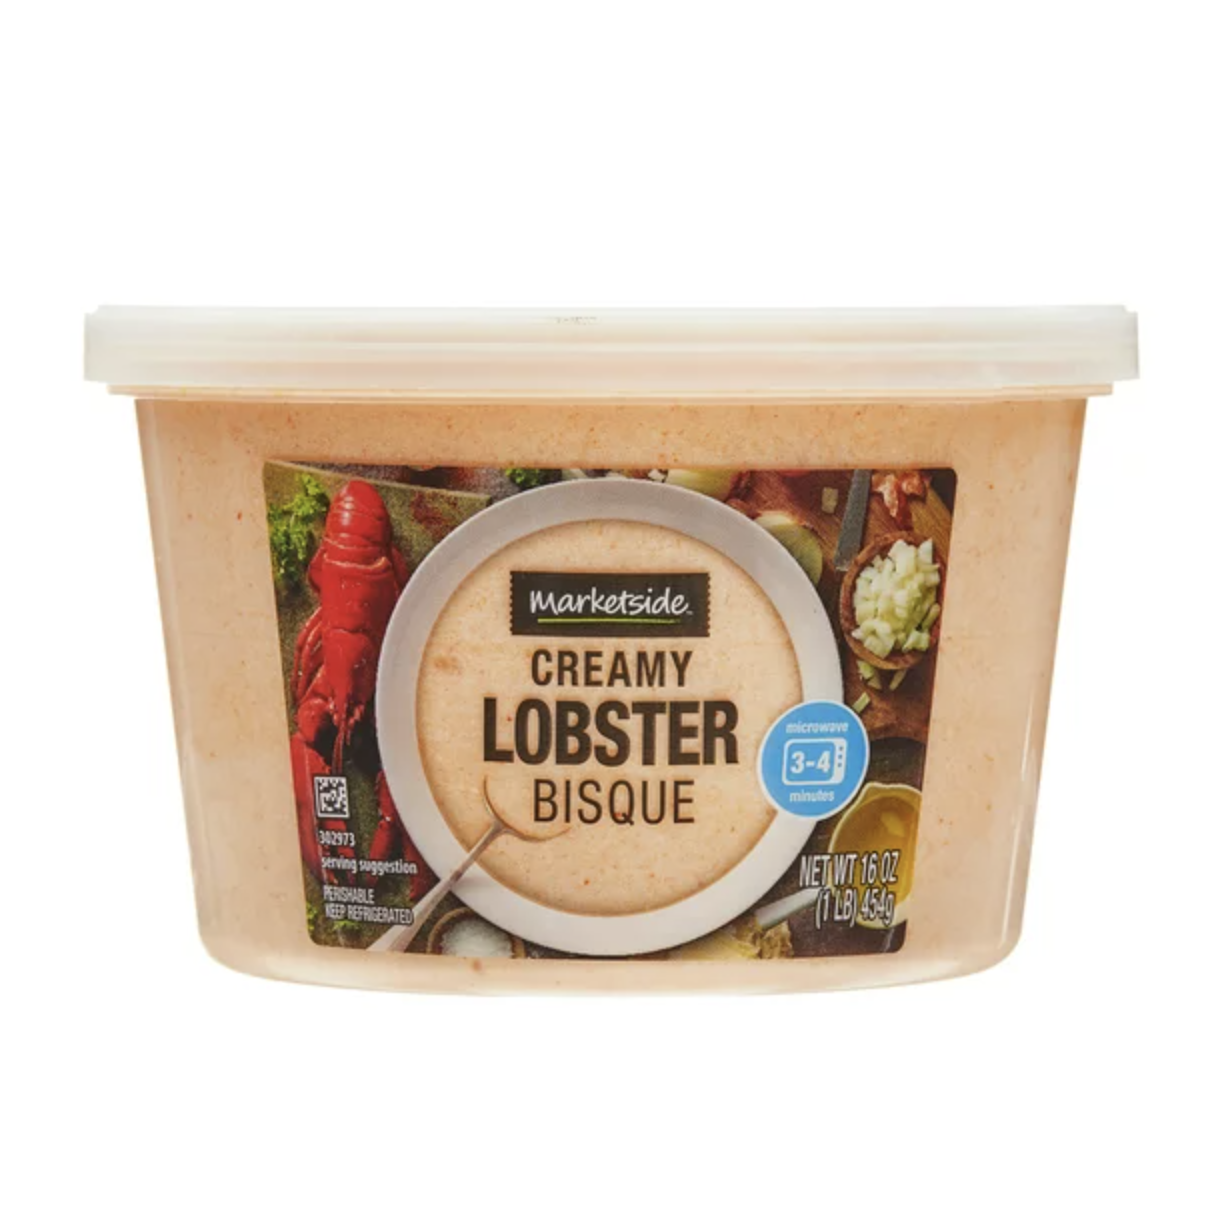 Creamy lobster bisque in microwave container